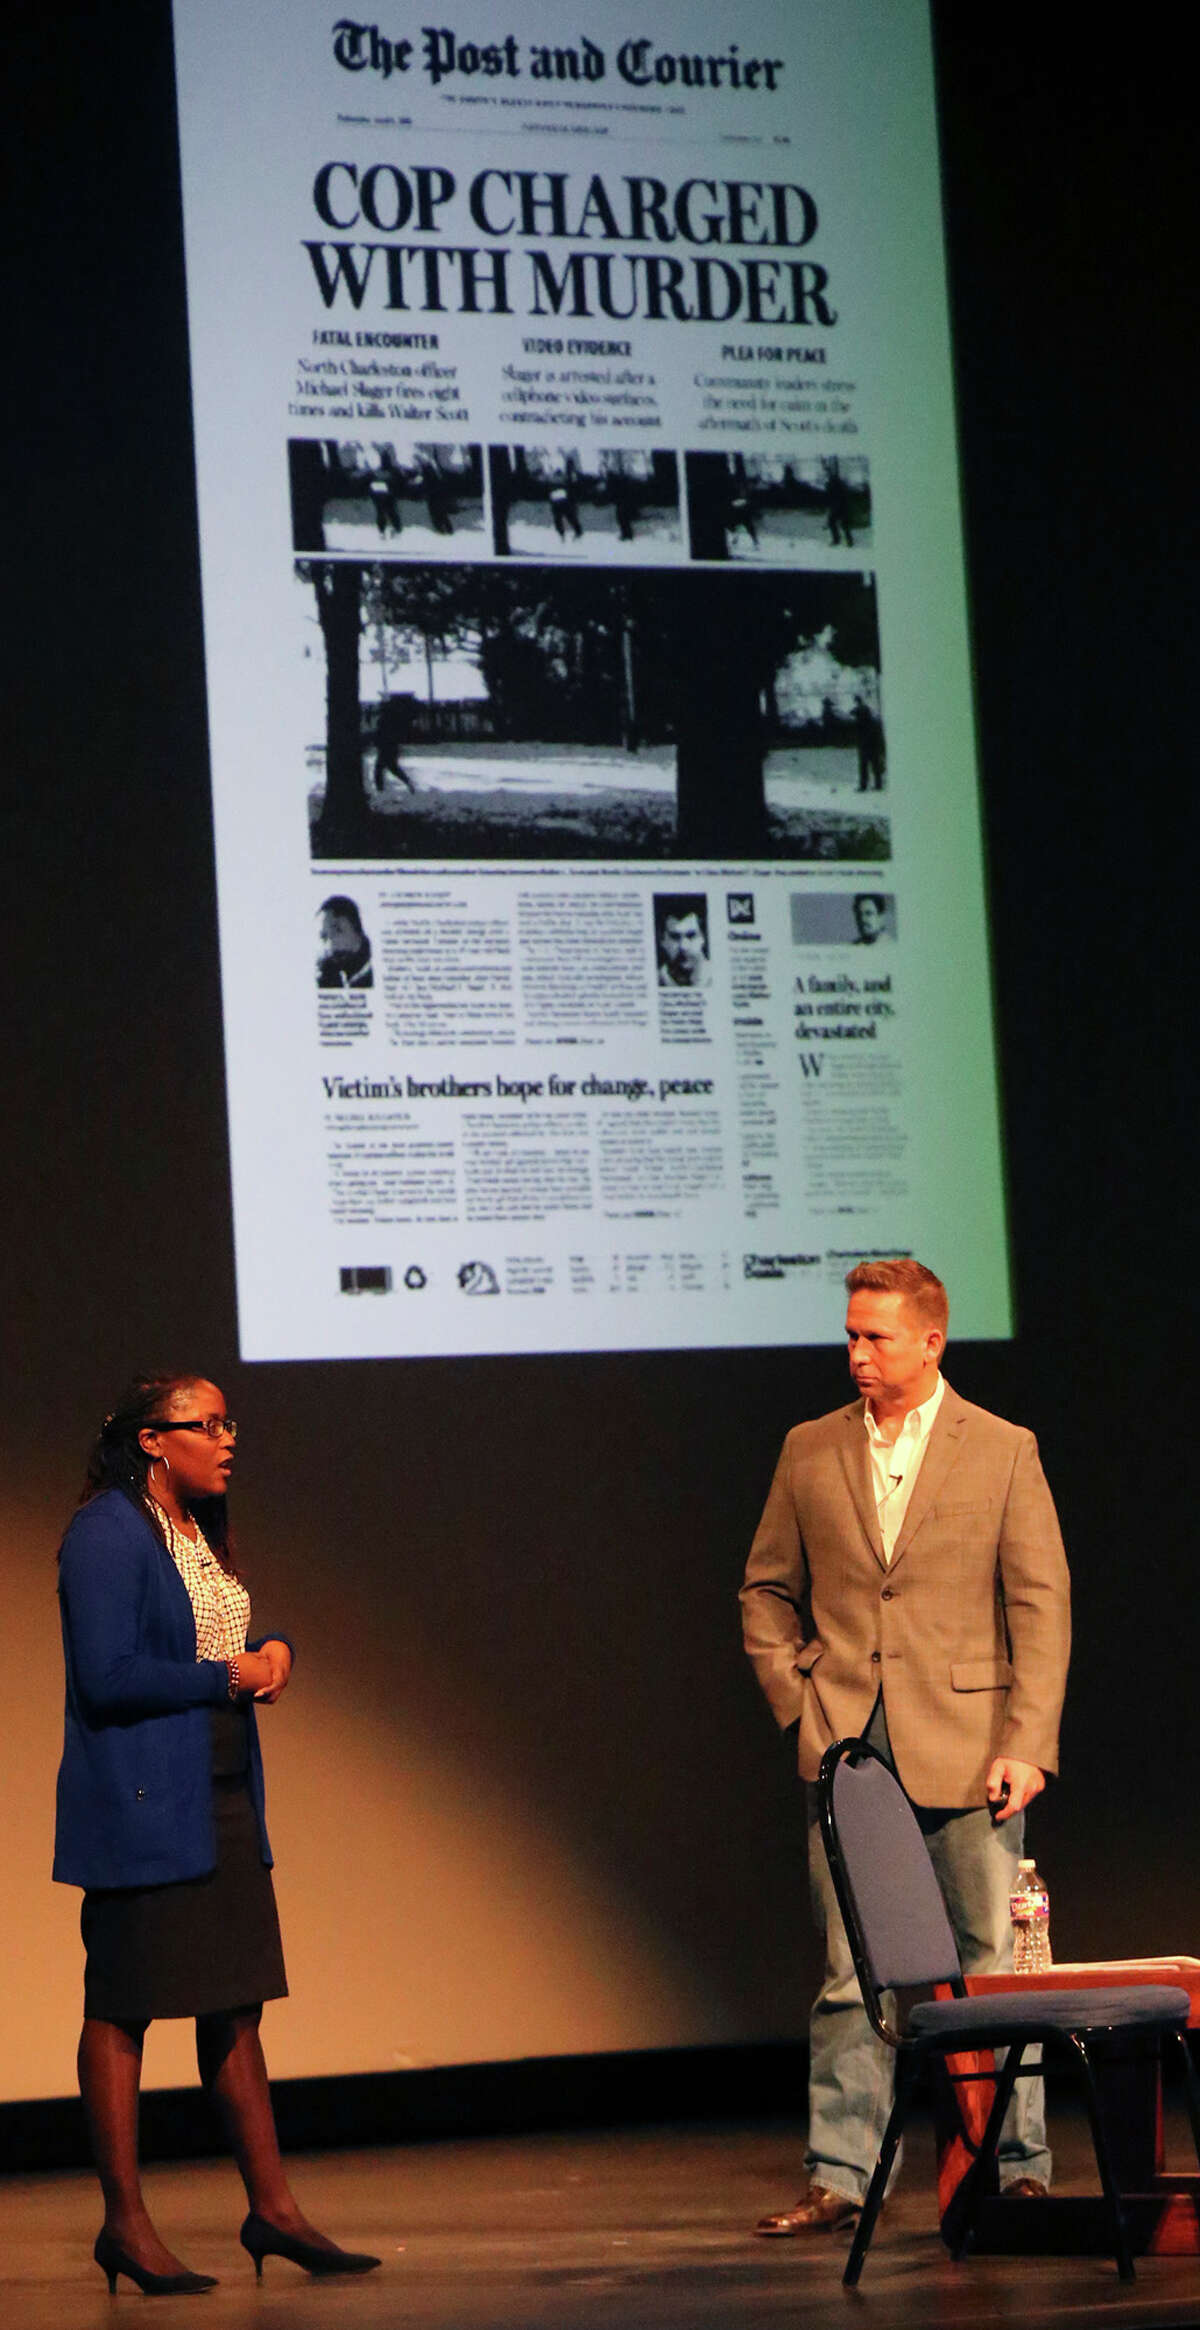 Journalists Christina Elmore (left) and Paul Zoeller (right) give a presentation Monday February 1, 2016 at San Antonio College about their coverage of recent racially charged events in Charleston South Carolina that have drawn national attention. Elmore is a reporter and Zoeller is a photojournalist for the Charleston Post and Courier.